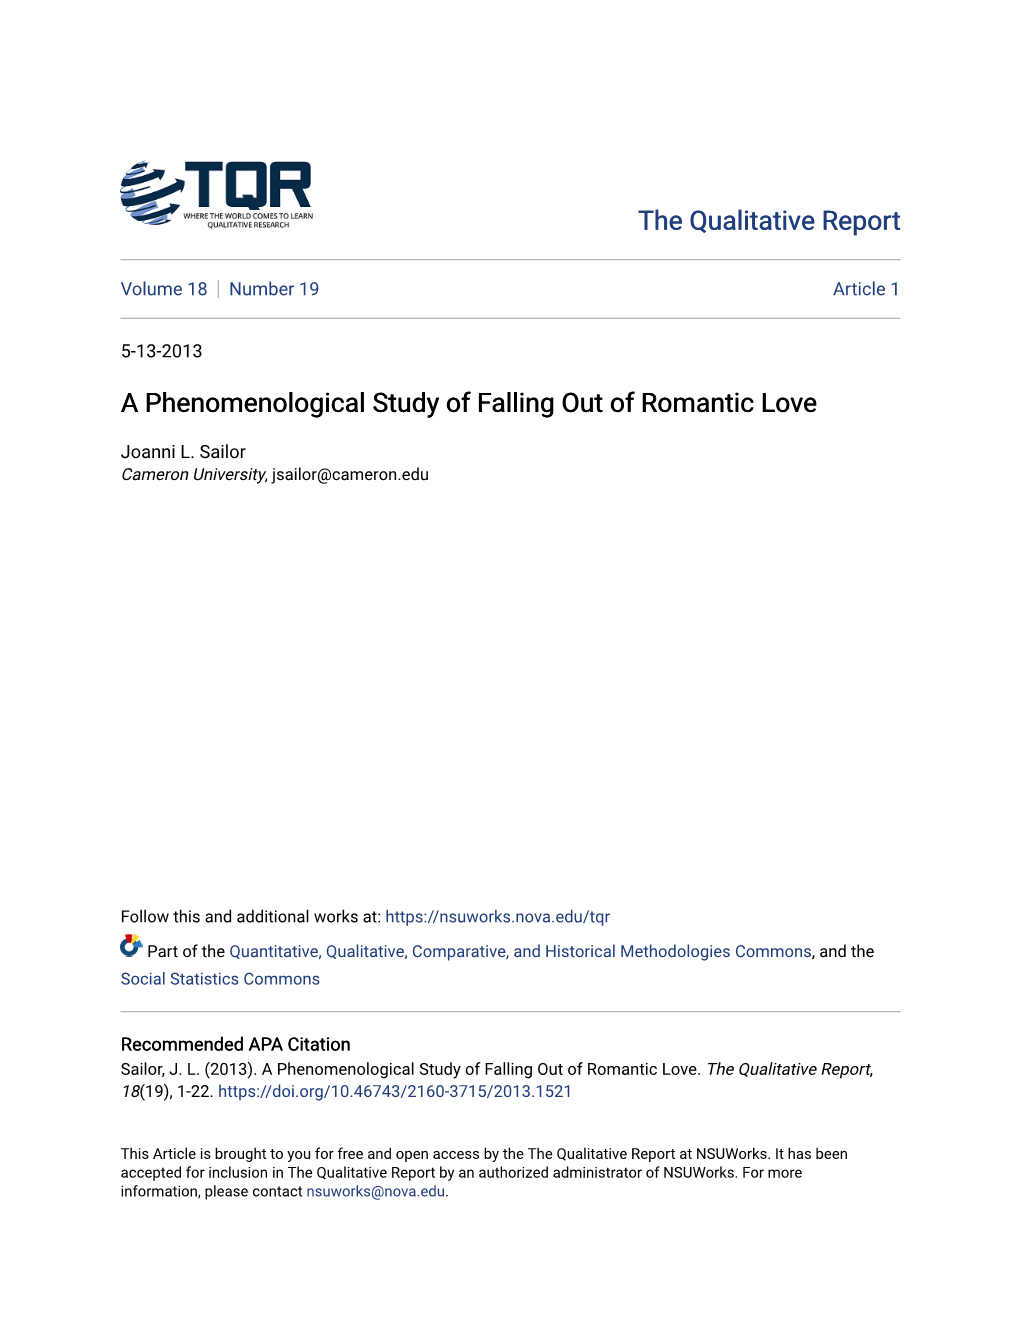 A Phenomenological Study of Falling out of Romantic Love